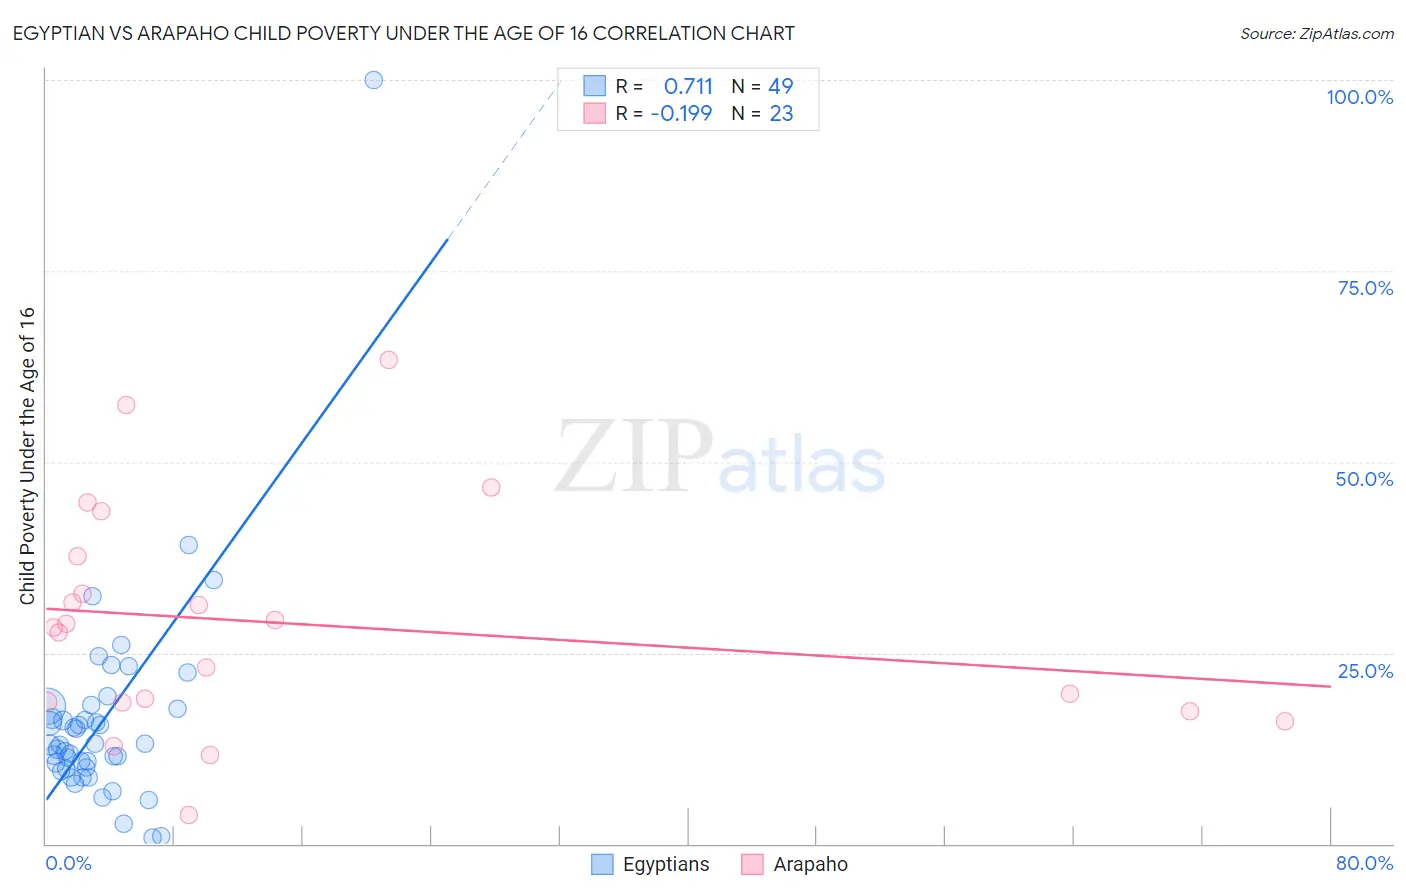 Egyptian vs Arapaho Child Poverty Under the Age of 16